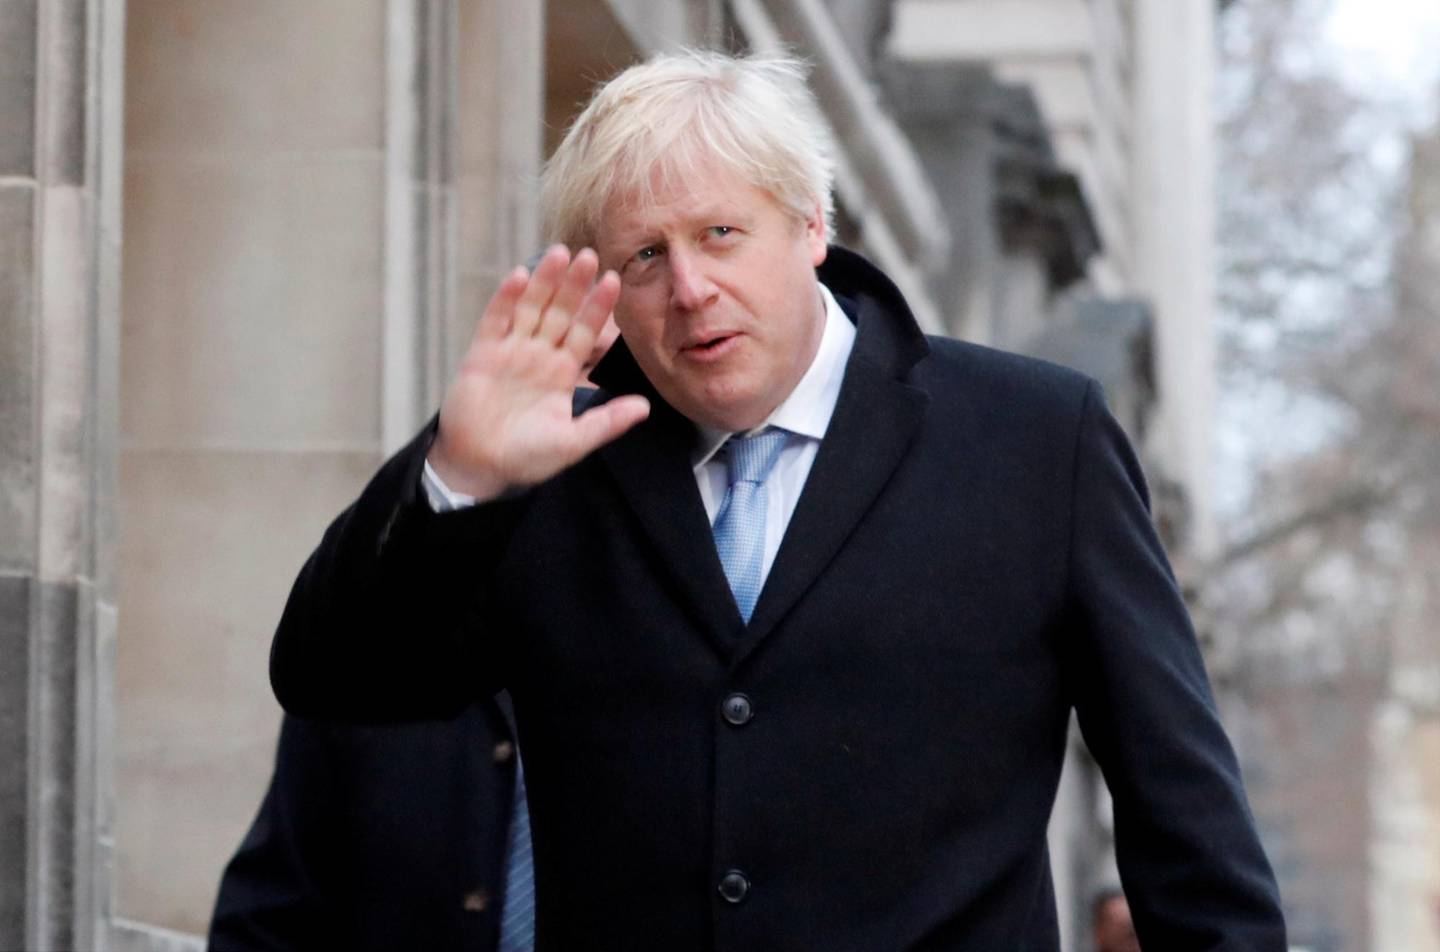 Britain's Prime Minister Boris Johnson waves as he arrives at a polling station, at the Methodist Central Hall, to vote in the general election in London, Britain, December 12, 2019. REUTERS/Thomas Mukoya